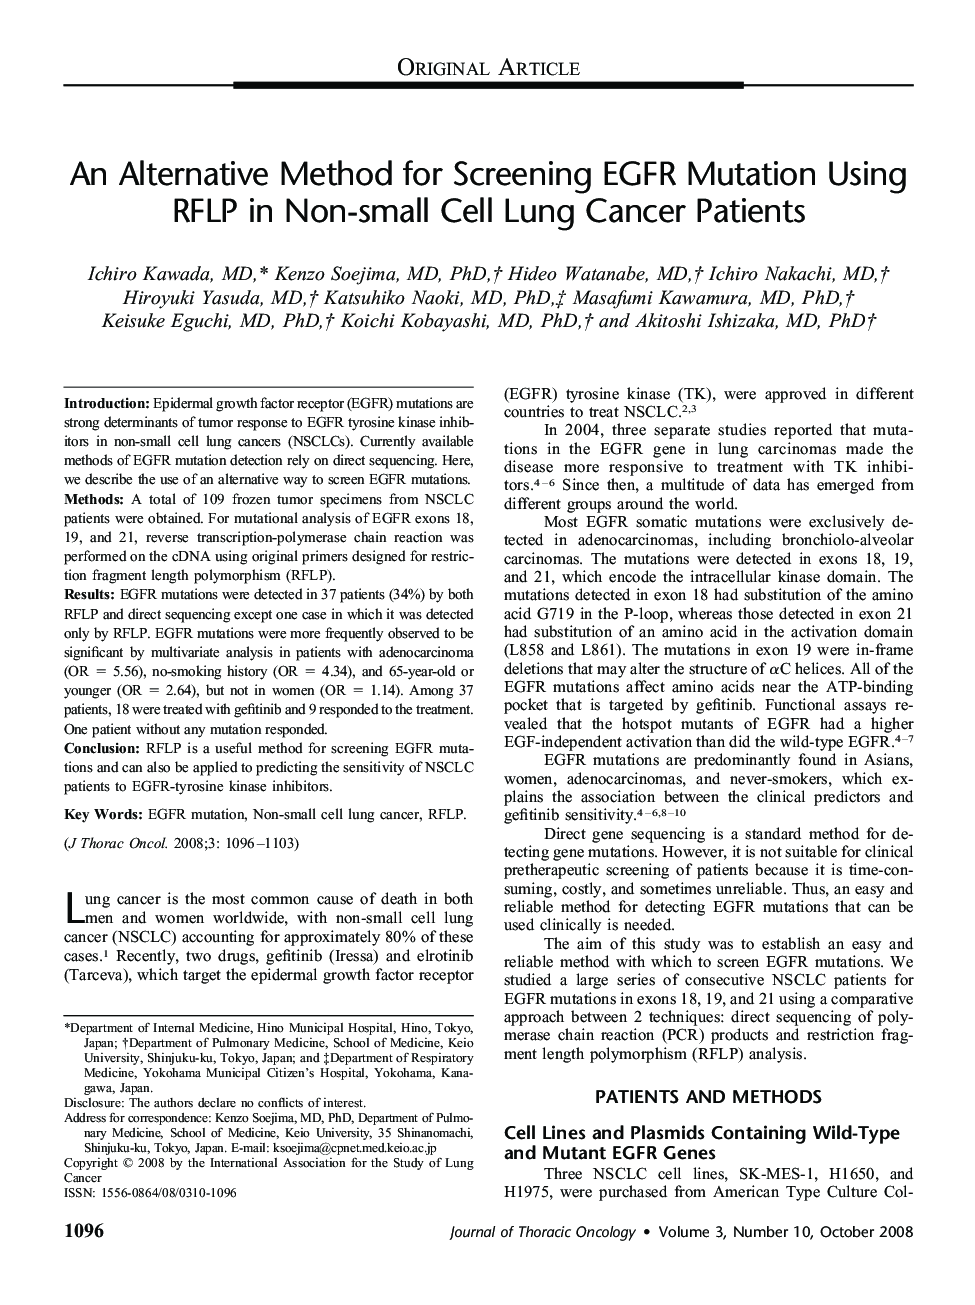 An Alternative Method for Screening EGFR Mutation Using RFLP in Non-small Cell Lung Cancer Patients 